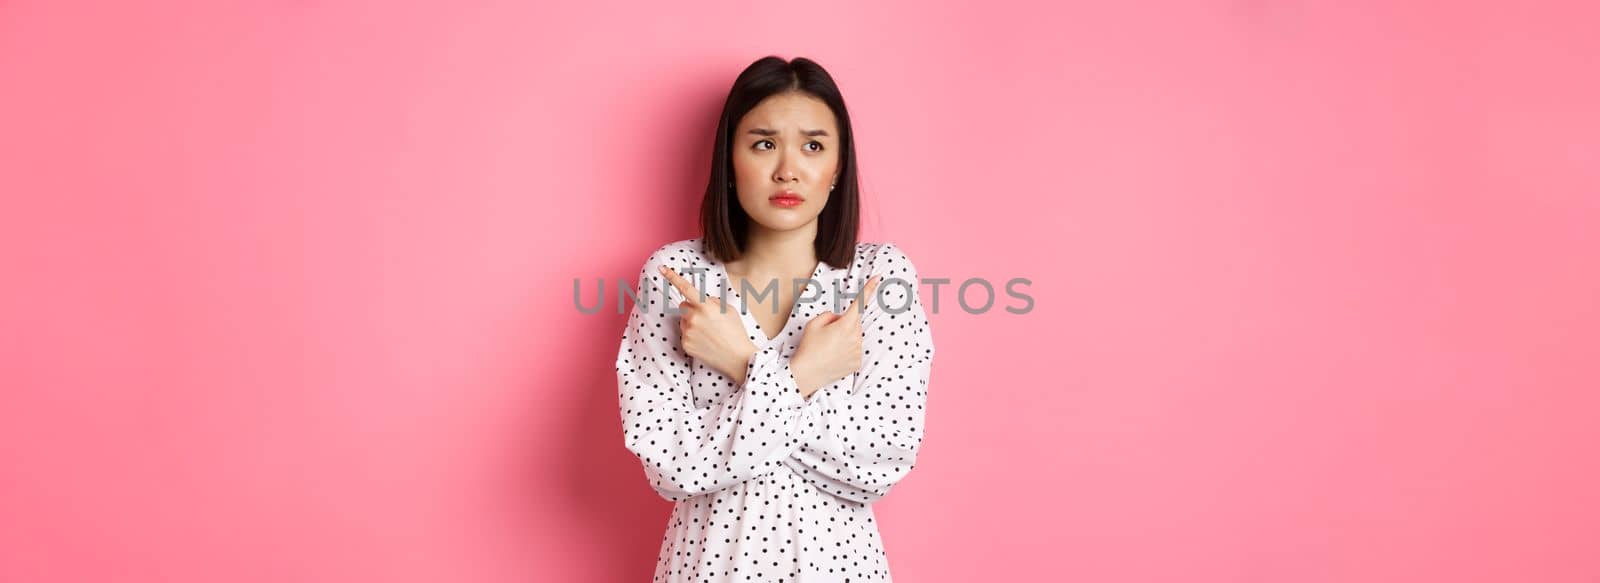 Concerned asian woman having doubts, pointing sideways and looking left with hesitant and sad face, need help with choice, standing over pink background.